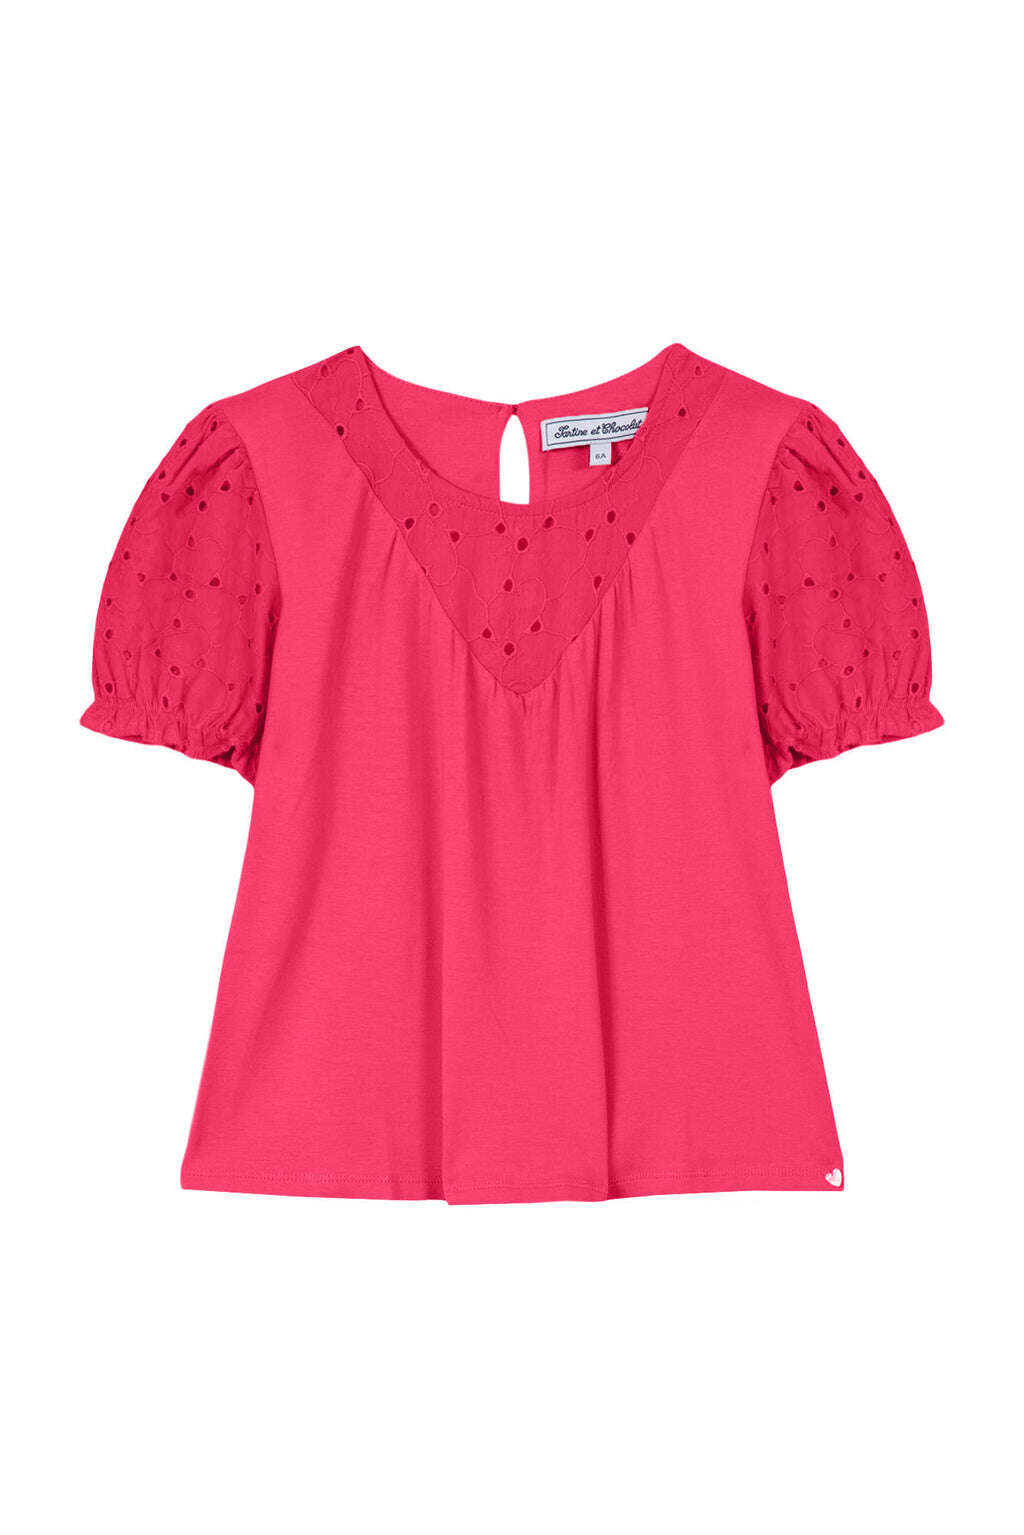 T-shirt - bougainvillier broderie anglaise